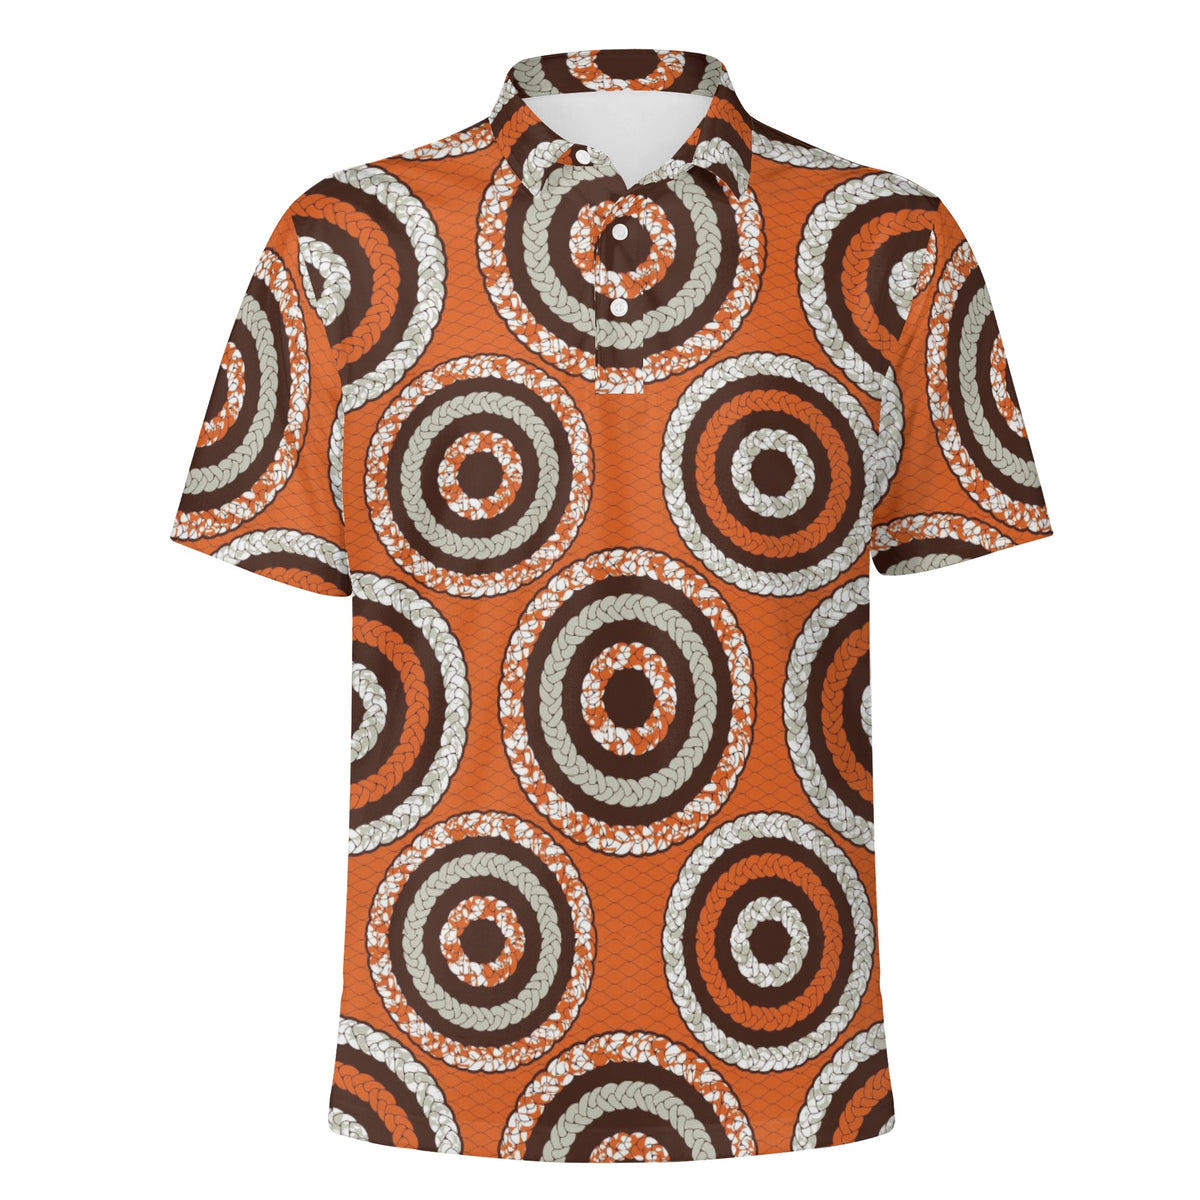 Sienna Polo Shirt with African Ankara prints in vibrant colors Sumbu_African_Prints_and_Designs